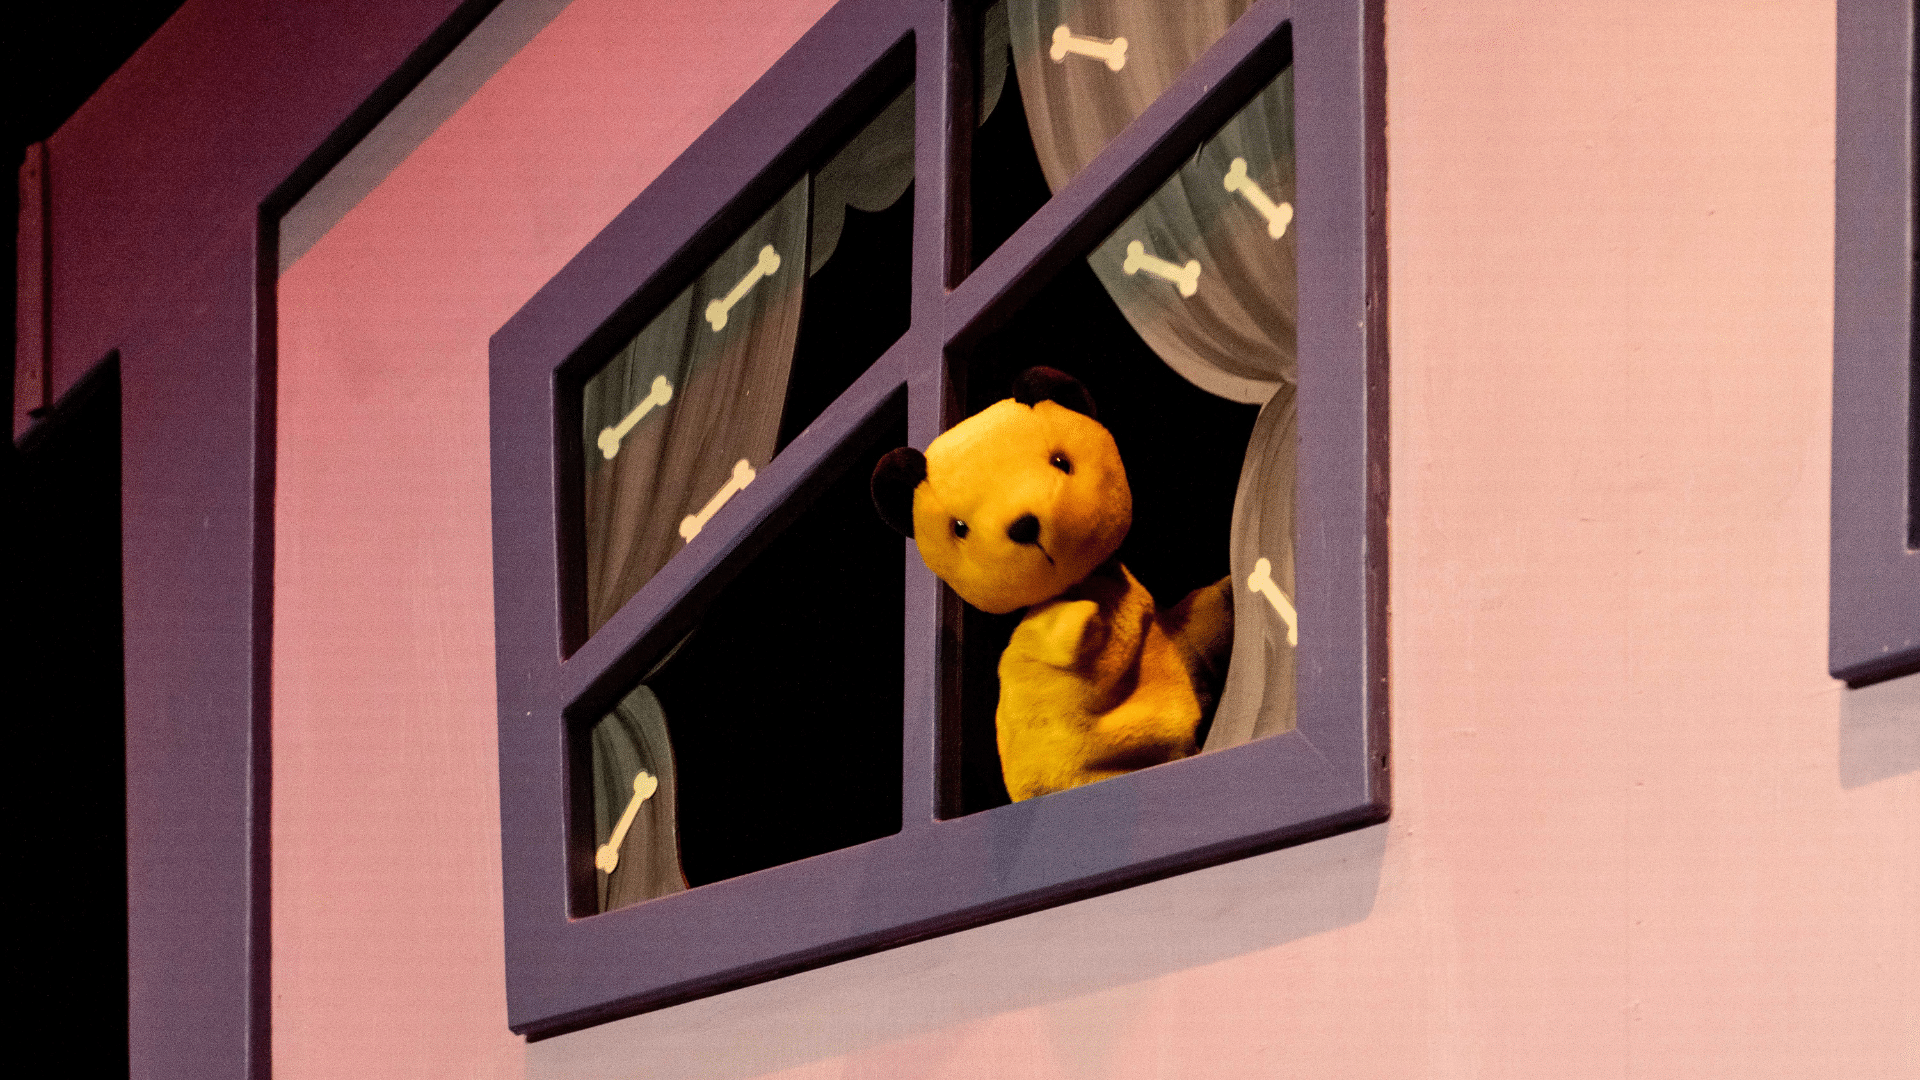 The Sooty Show production image: Sooty peers out of a purple window in the set.